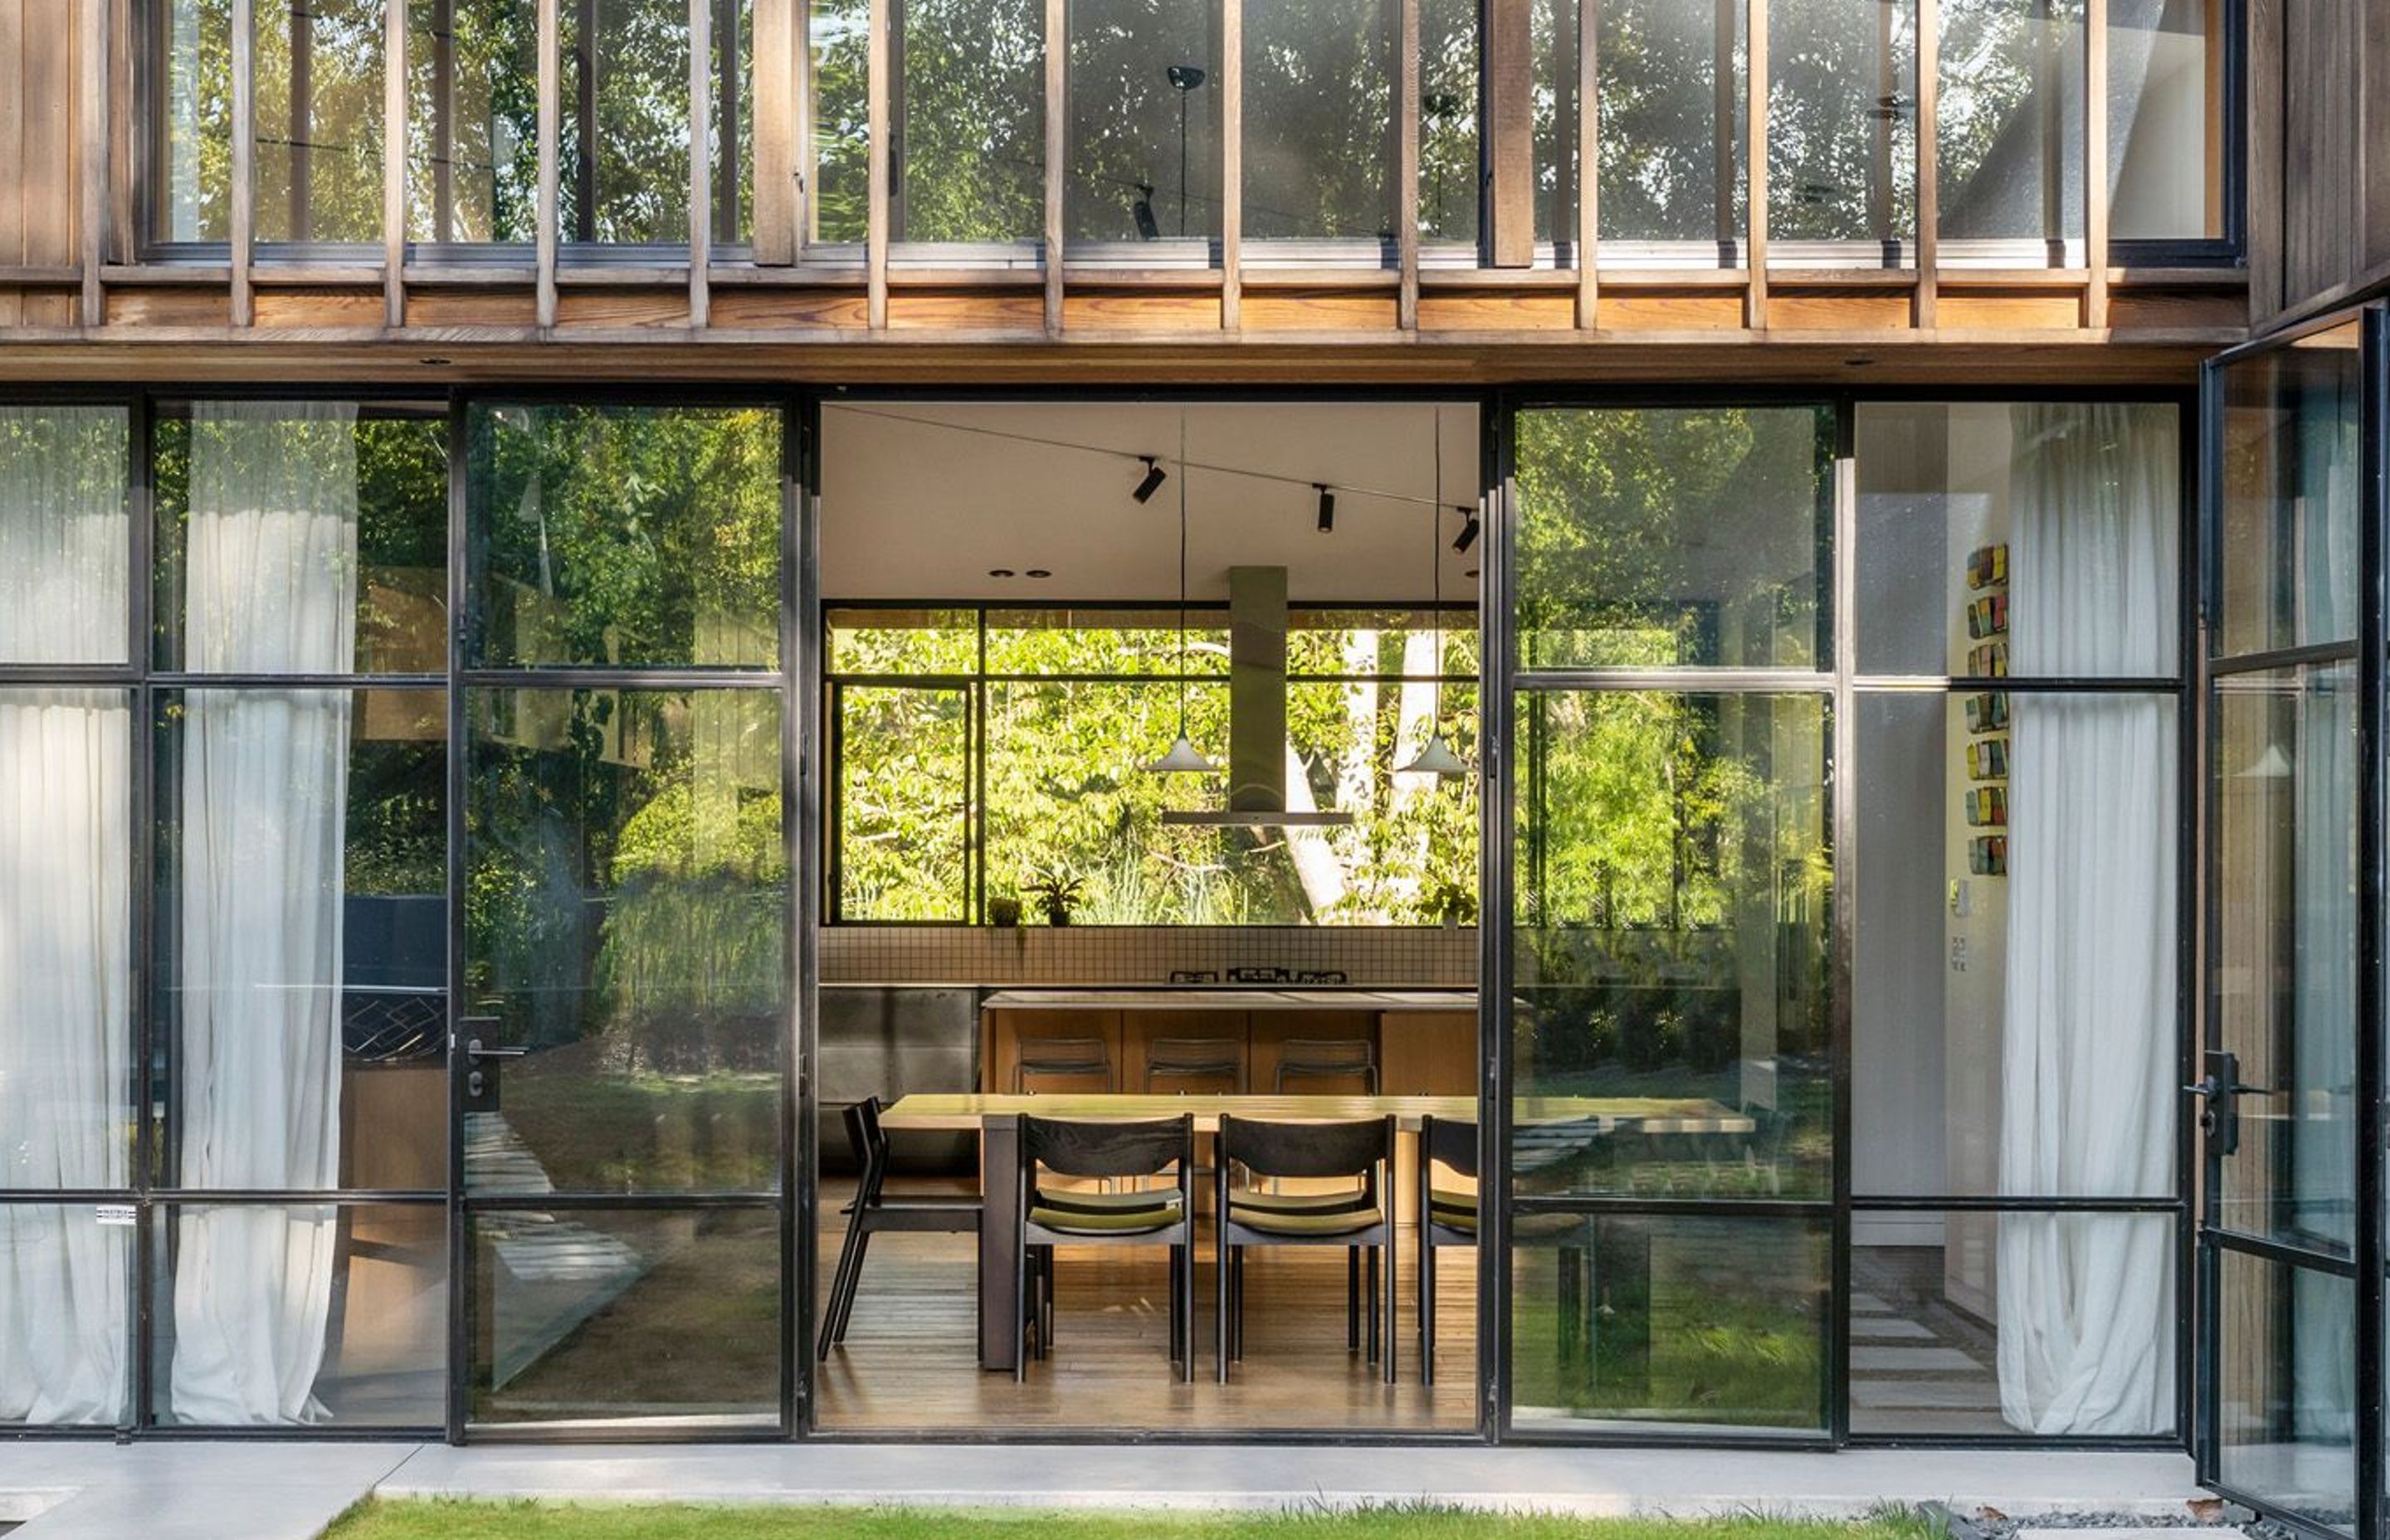 Enter the dining and kitchen area through full-height folding steel doors.